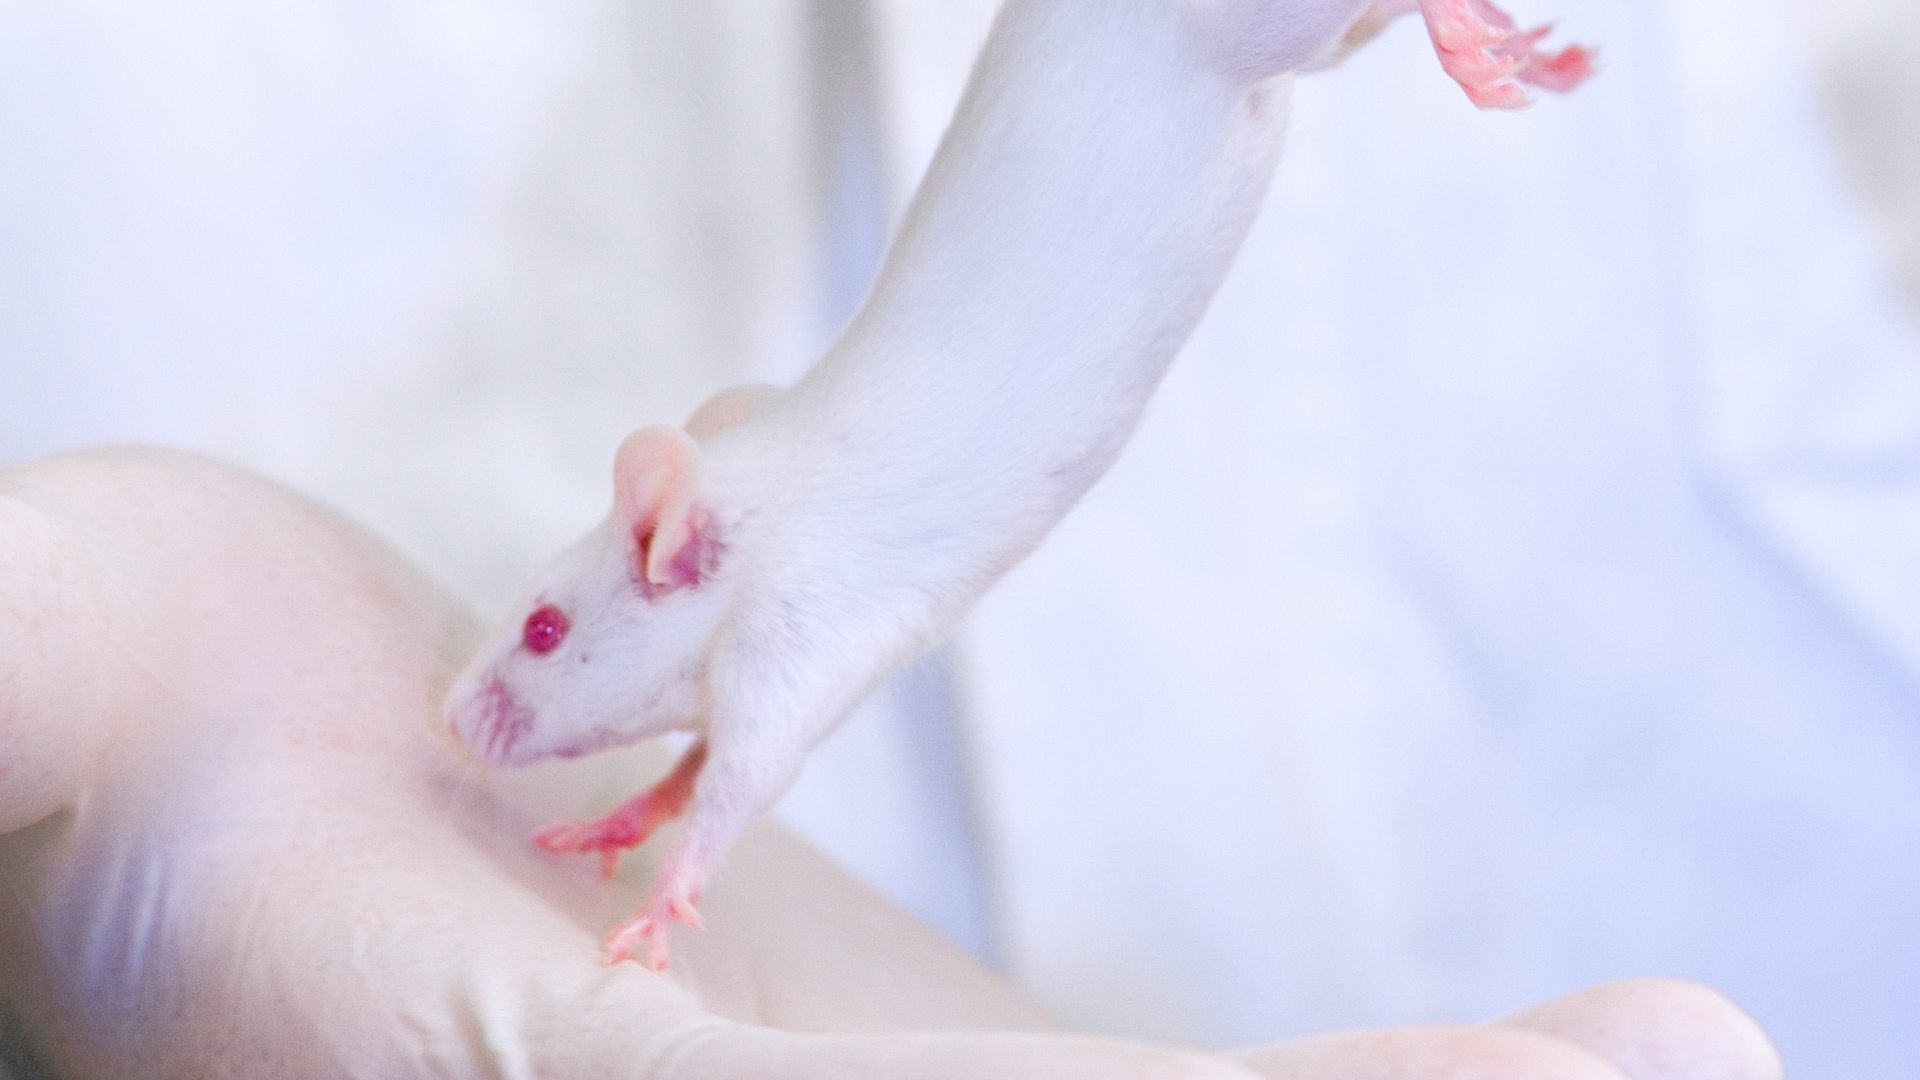 Another Lab Hangs Mice by Their Tails for Cruel Experiments – Rise